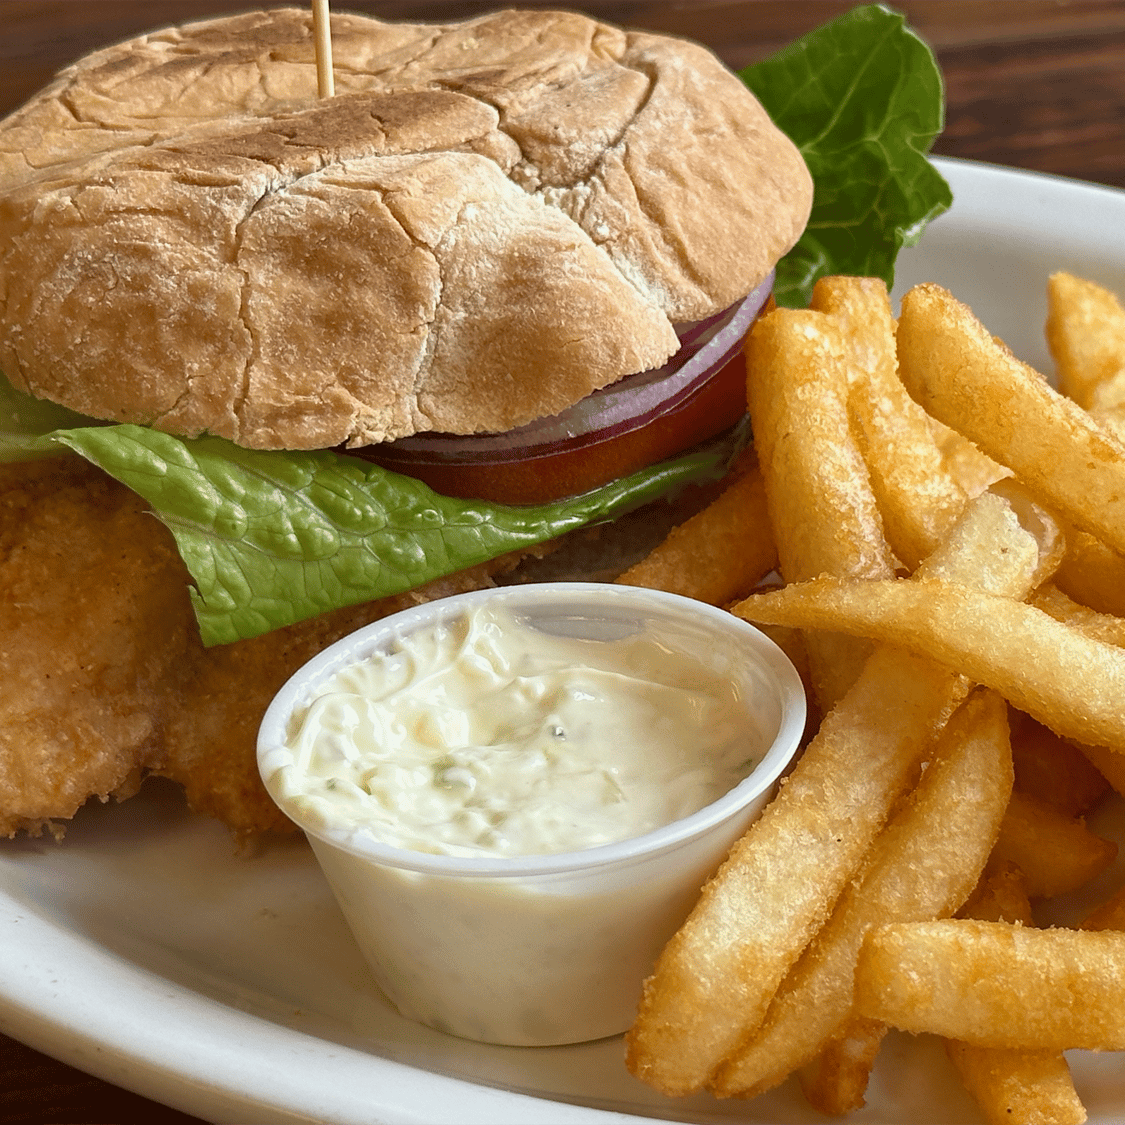 Delicious Fish Sandwich Options for Breakfast or Lunch